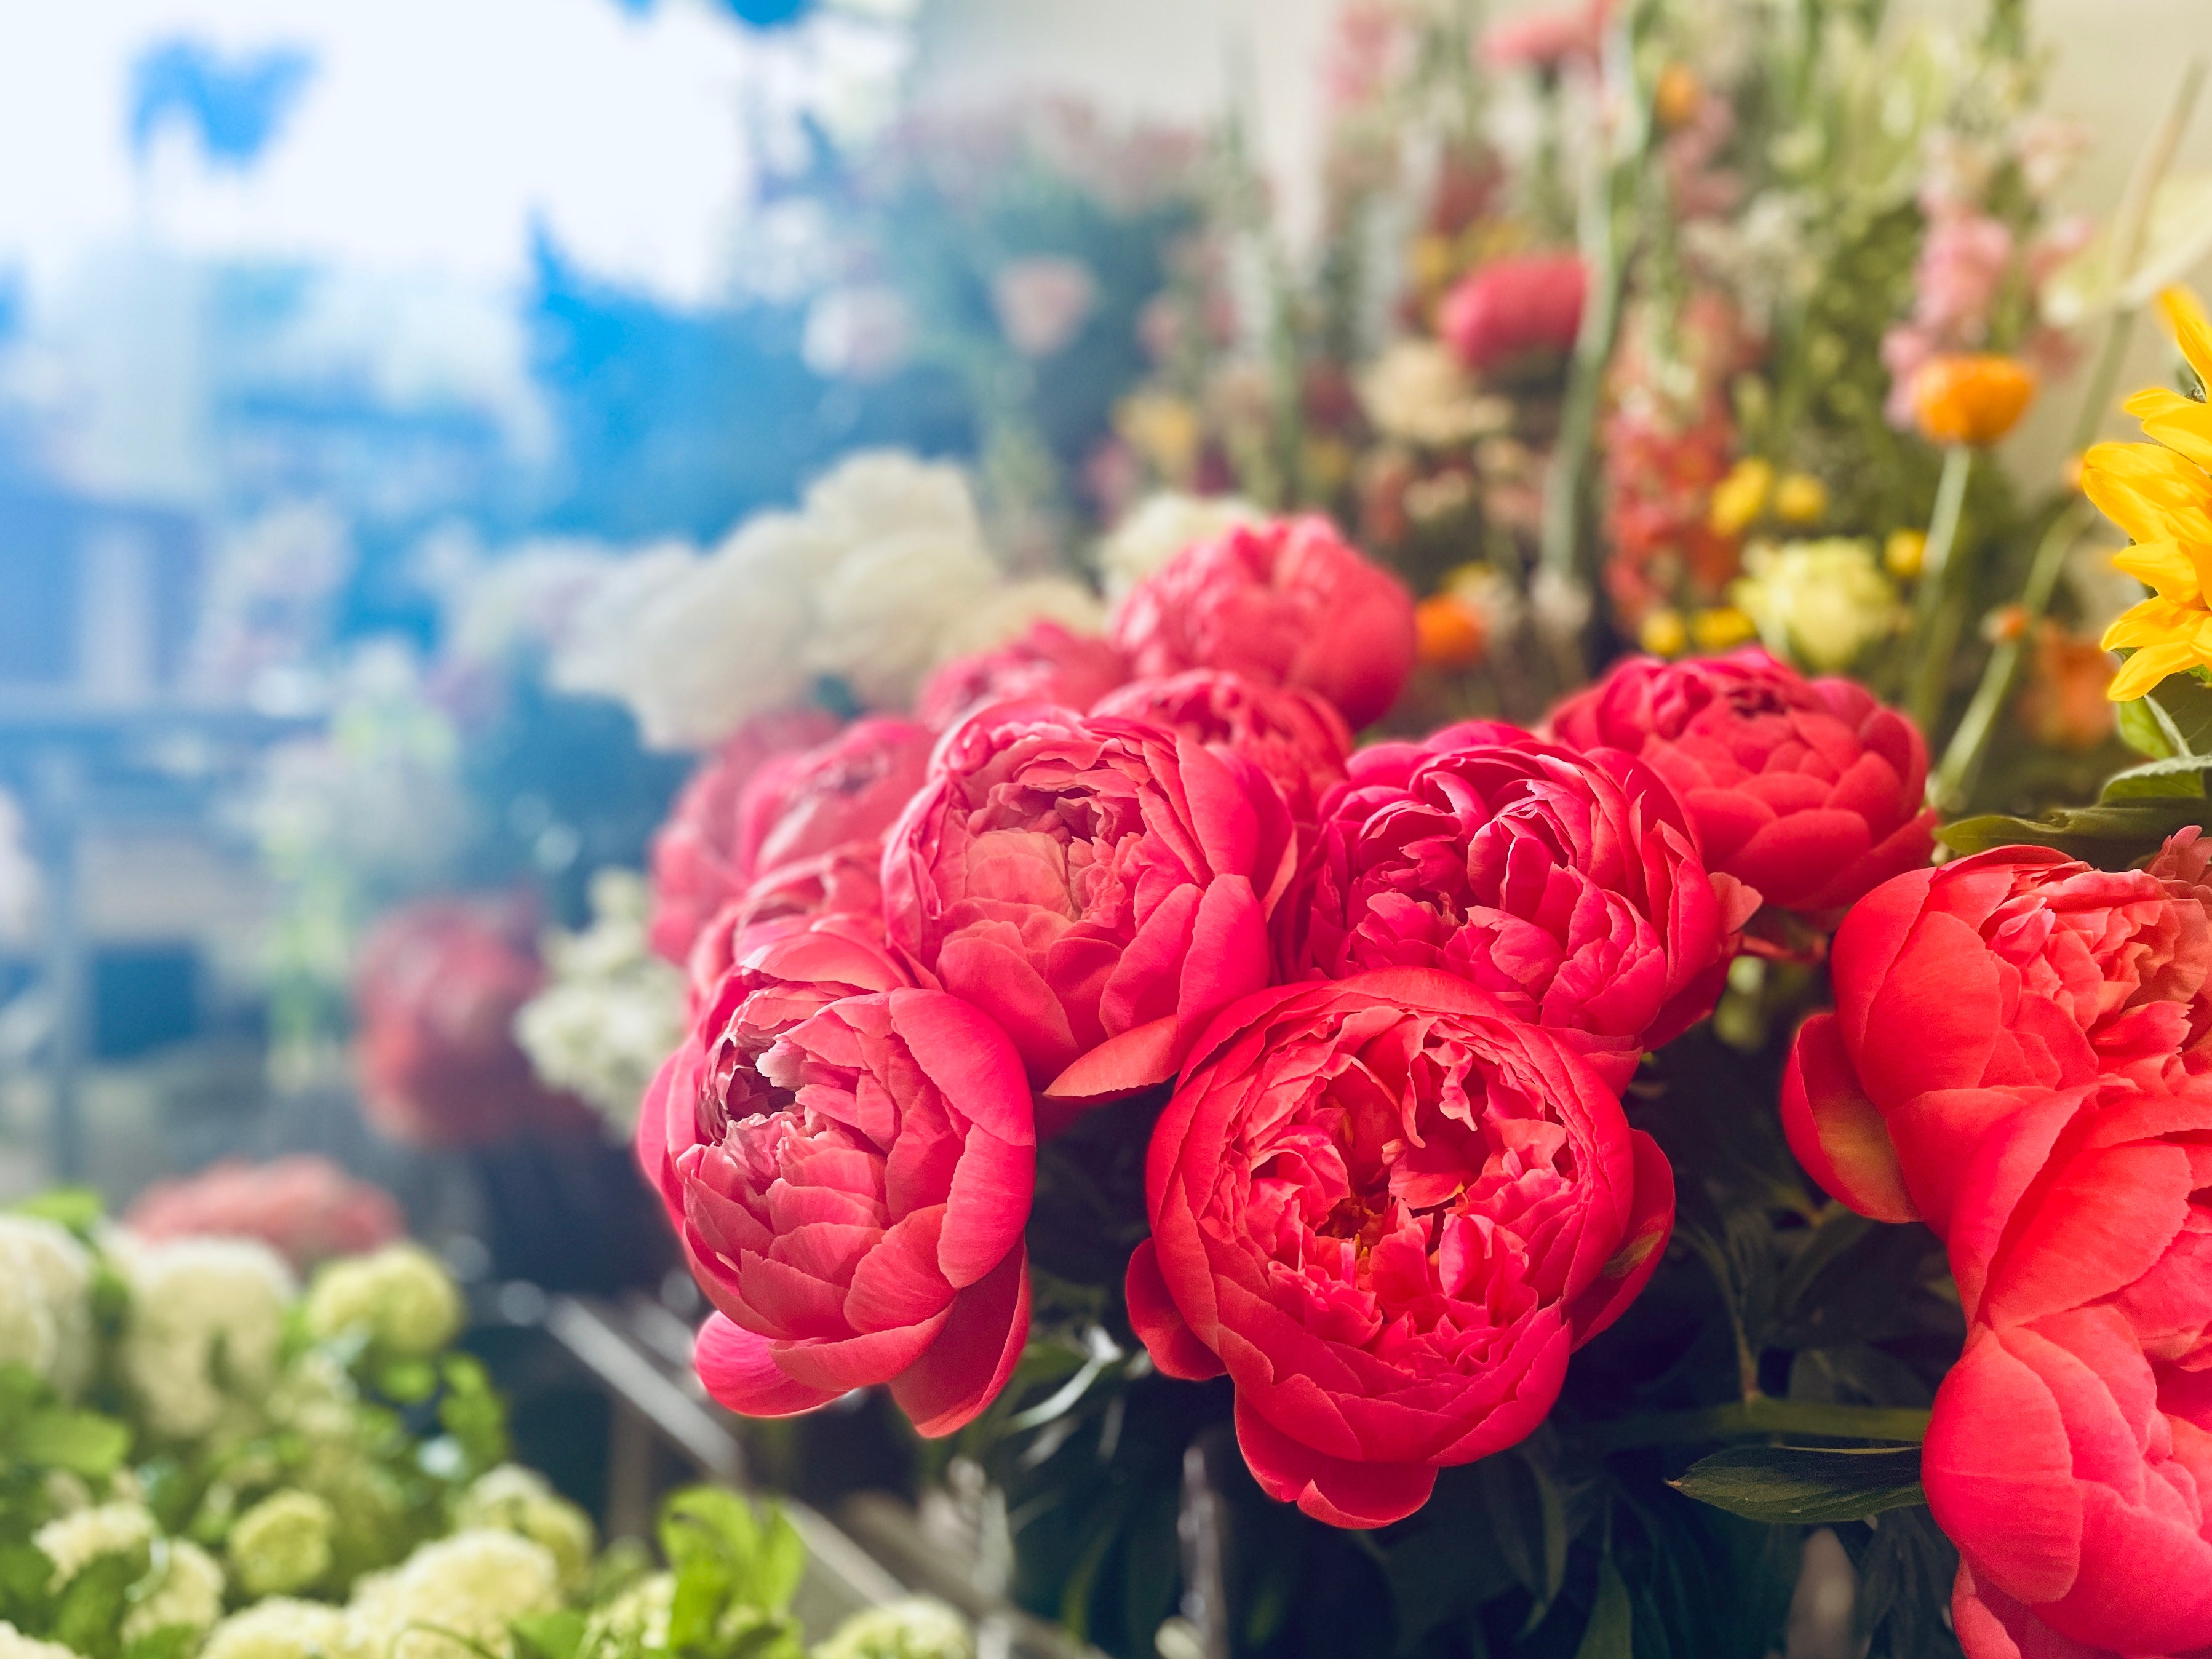 Roses in a flower shop display